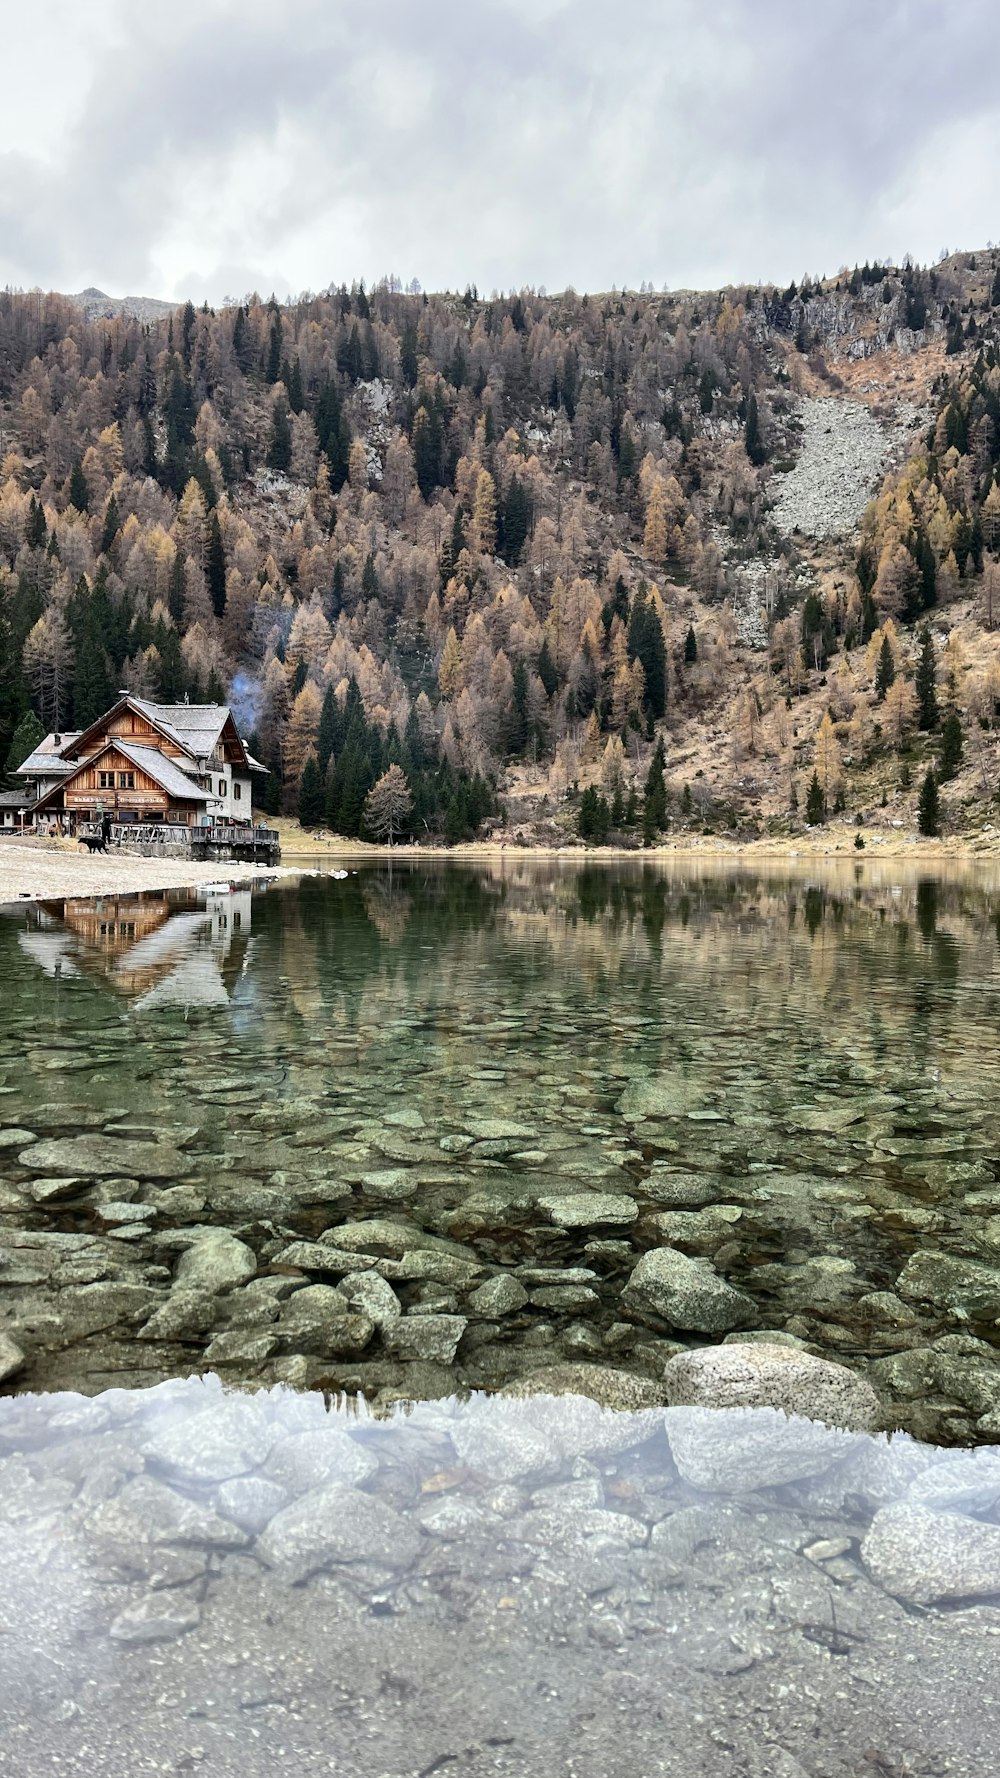 a house on a rocky shore by a lake